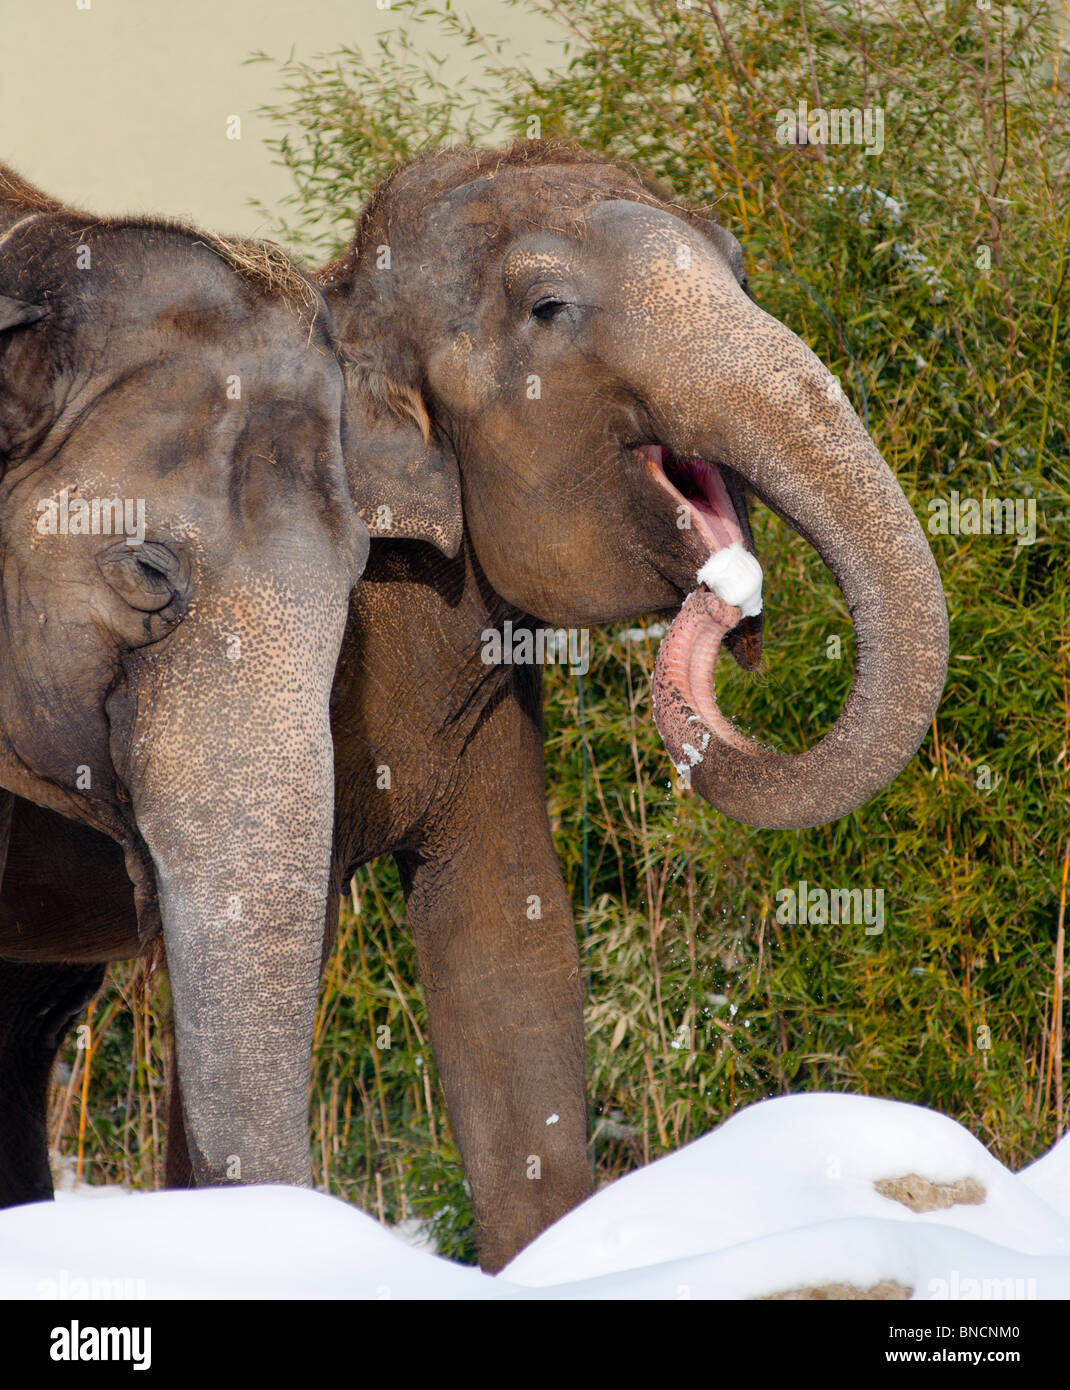 Two funny elephants eating snow. Stock Photo